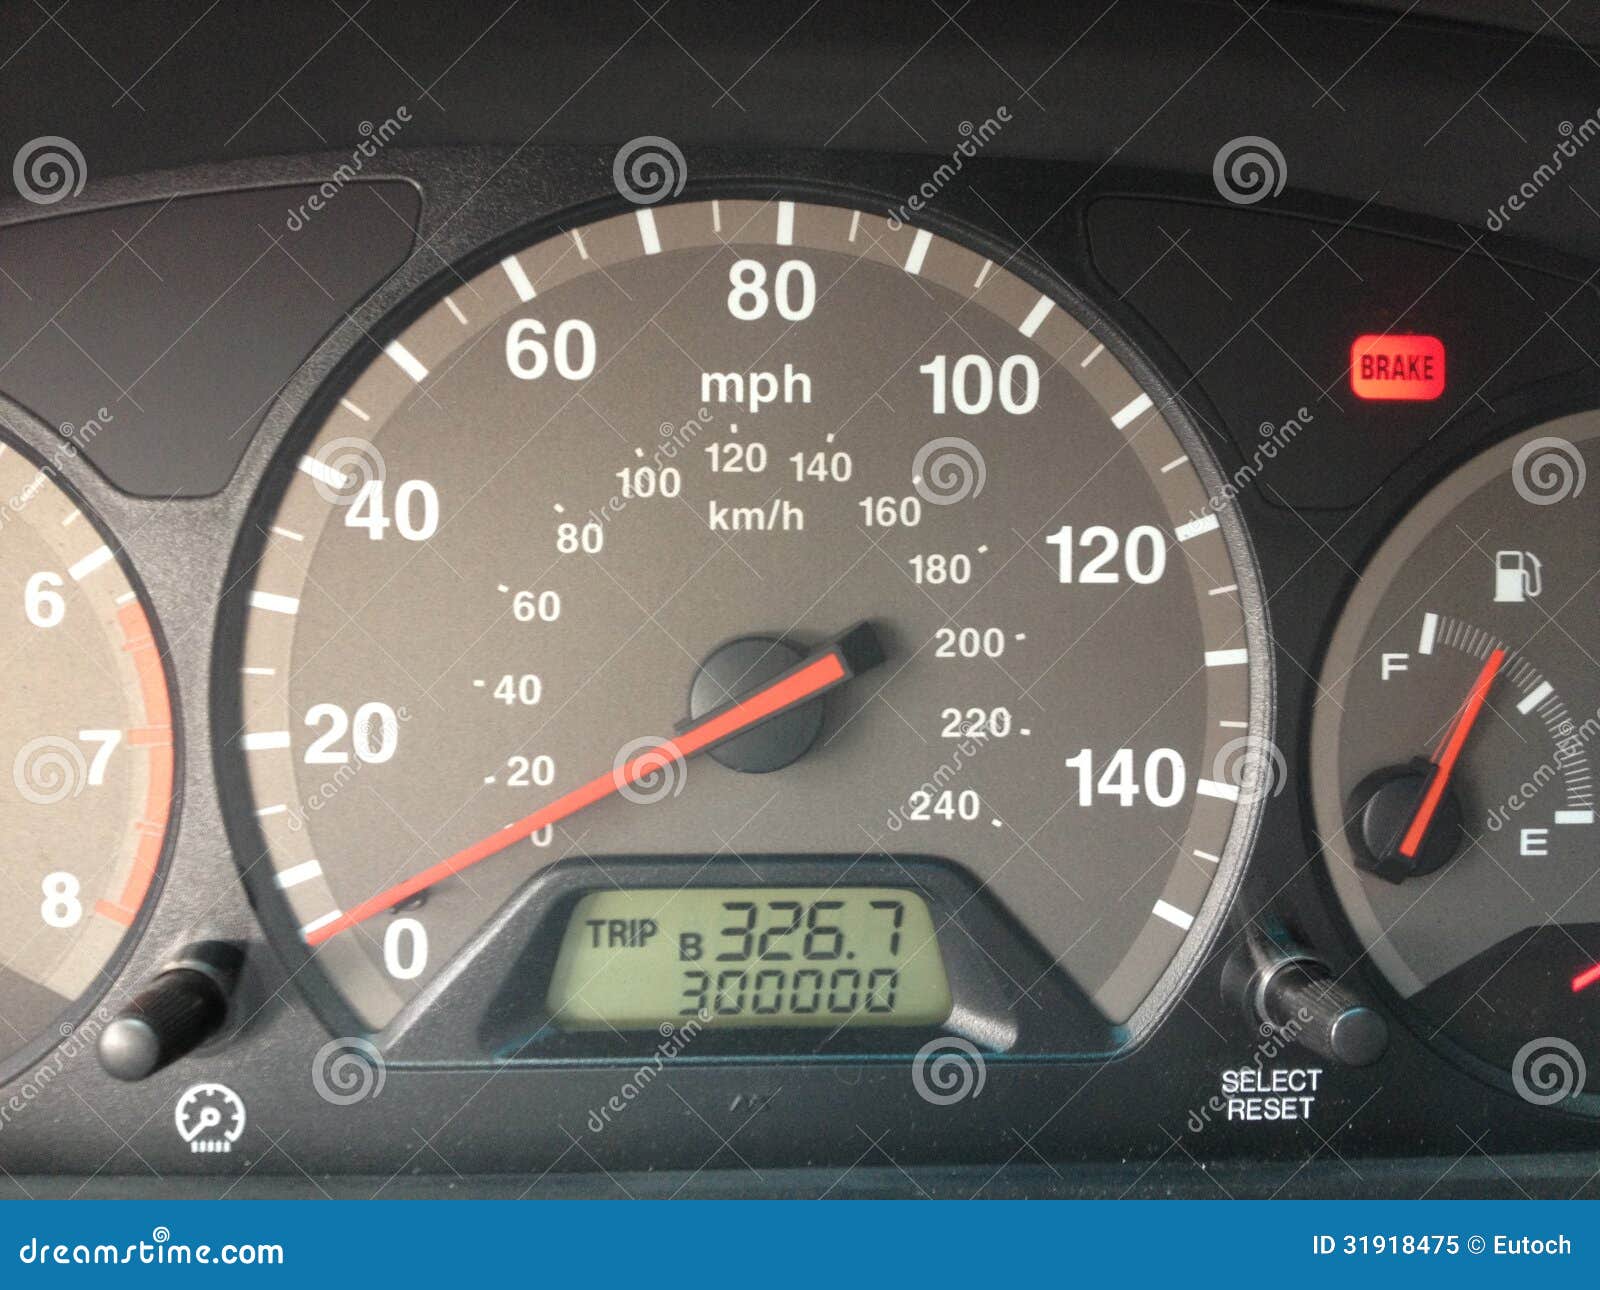 should i buy a car with 300 000 miles